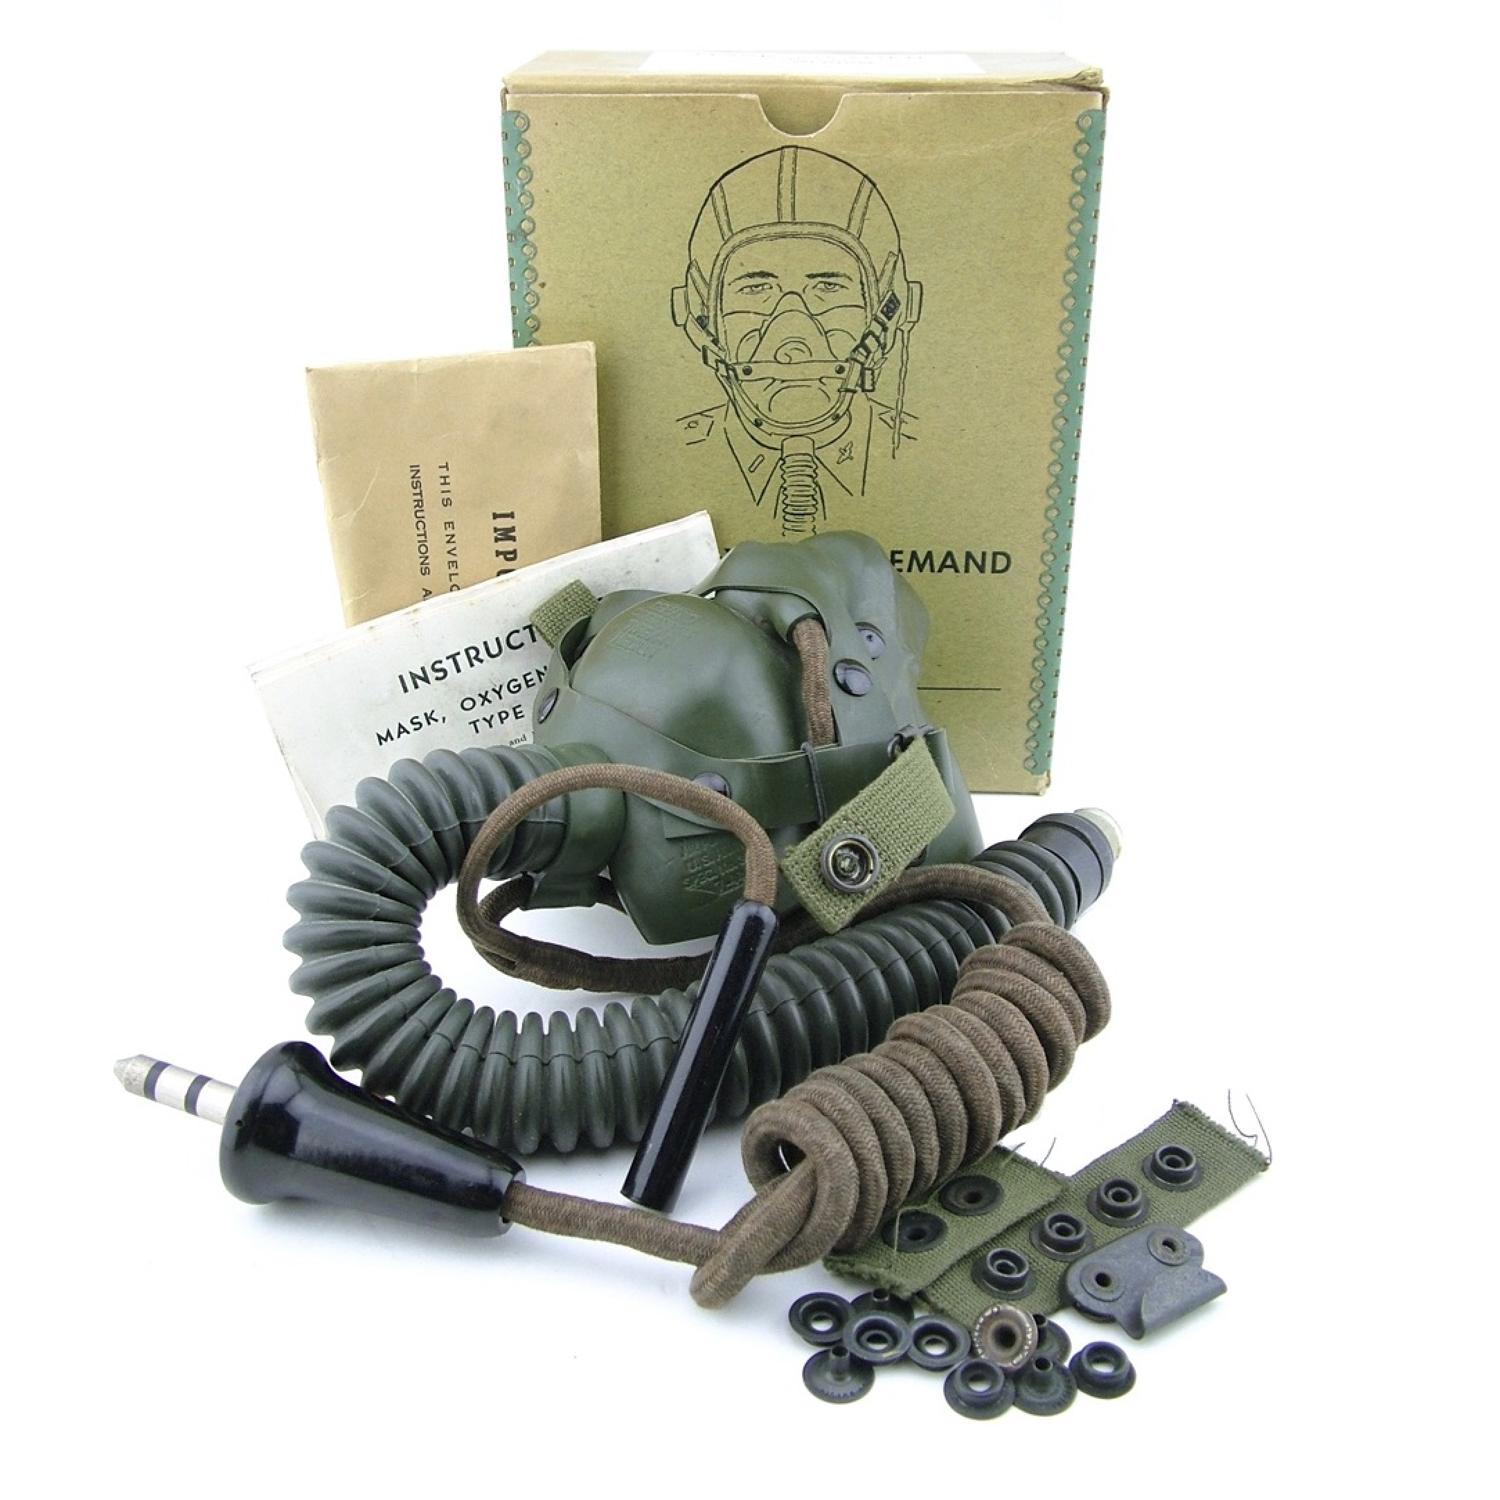 USAAF A-14 oxygen mask c/w T-44, boxed